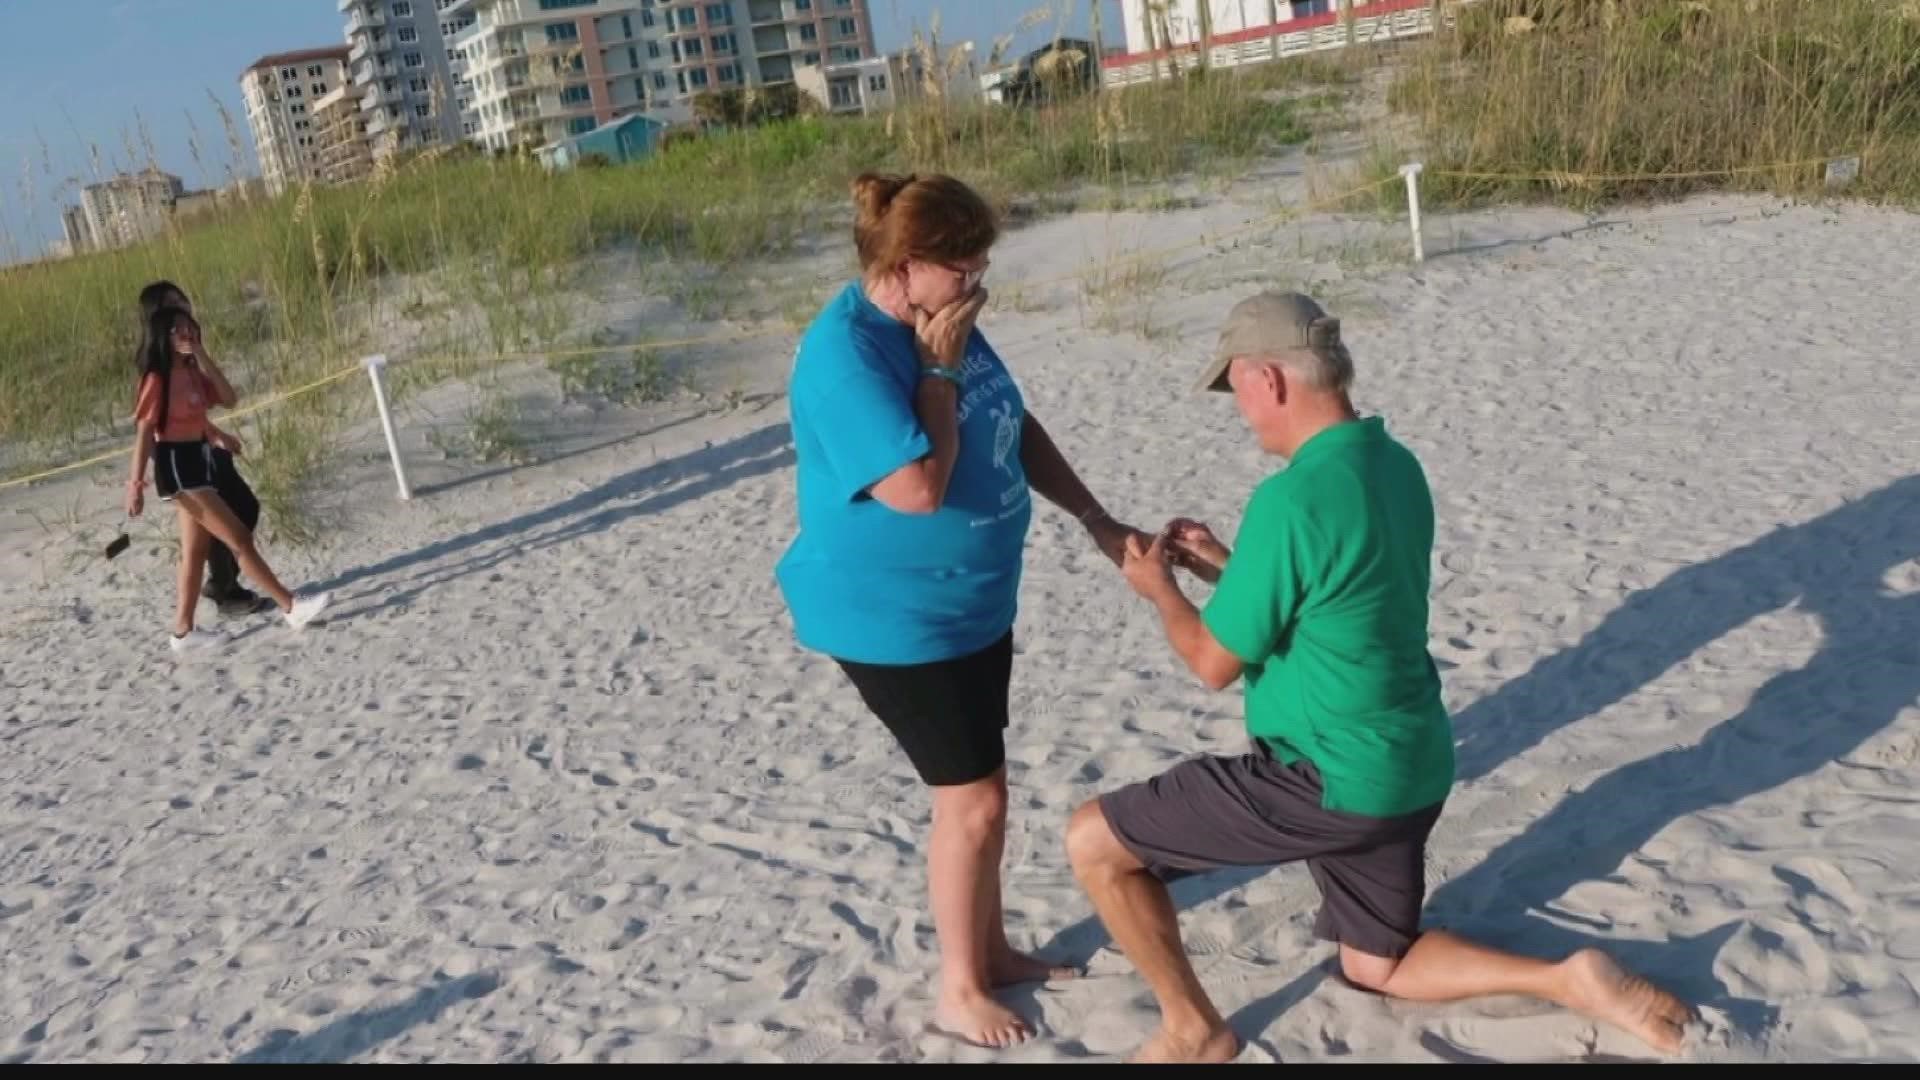 Deb and Dan met volunteering at the Beaches Cleanup event two years ago. He proposed to her two years later at the same event Tuesday. She said yes.